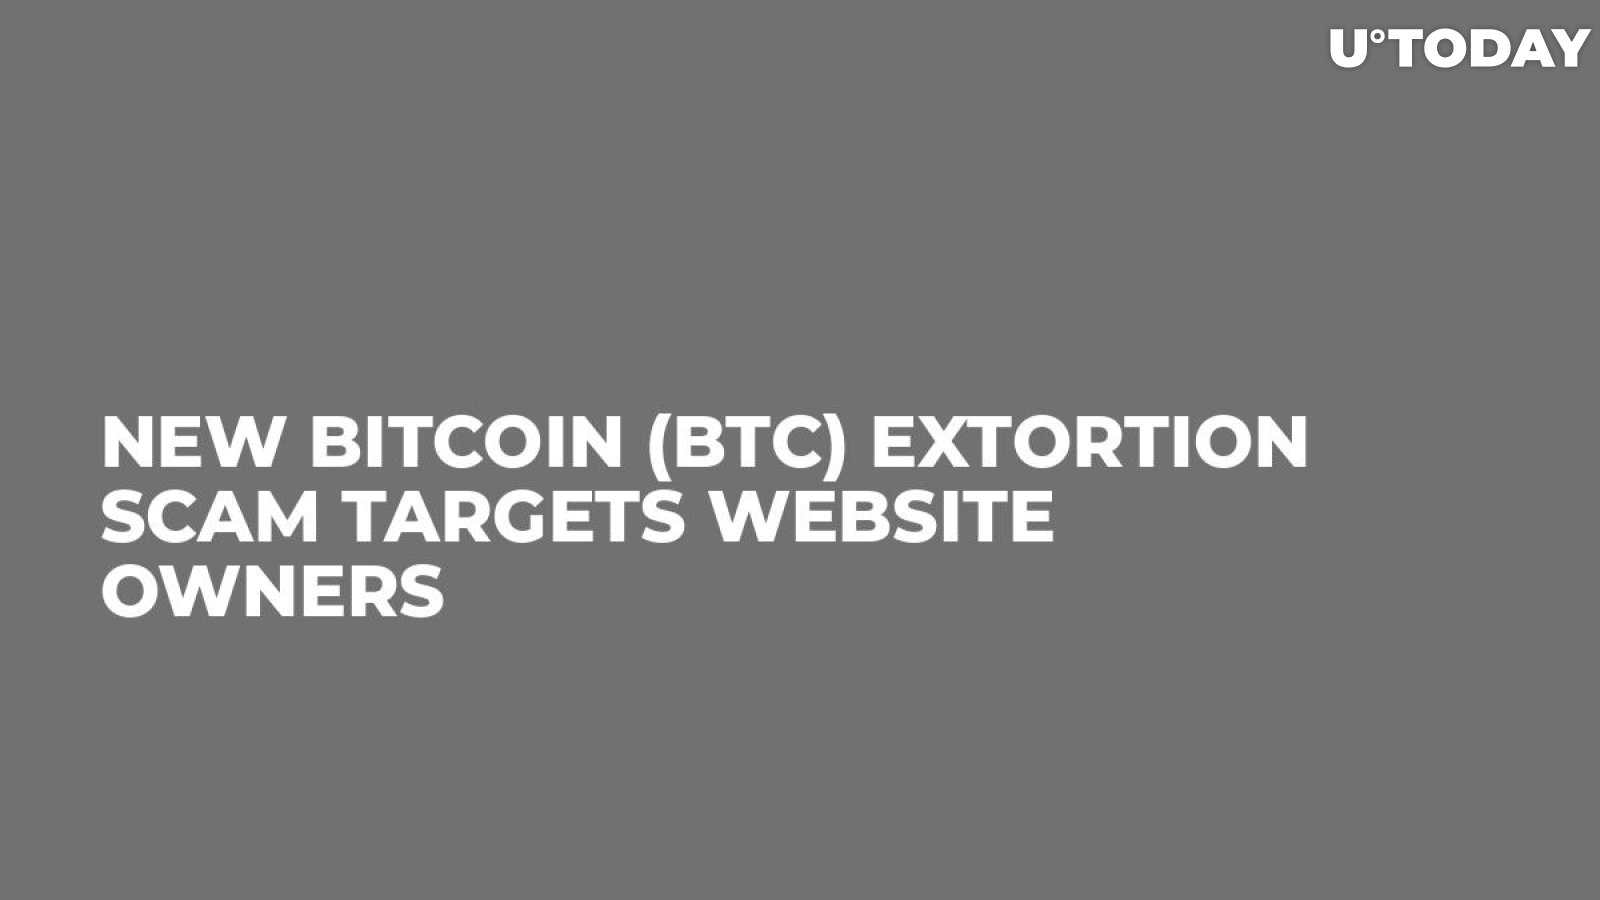 New Bitcoin (BTC) Extortion Scam Targets Website Owners